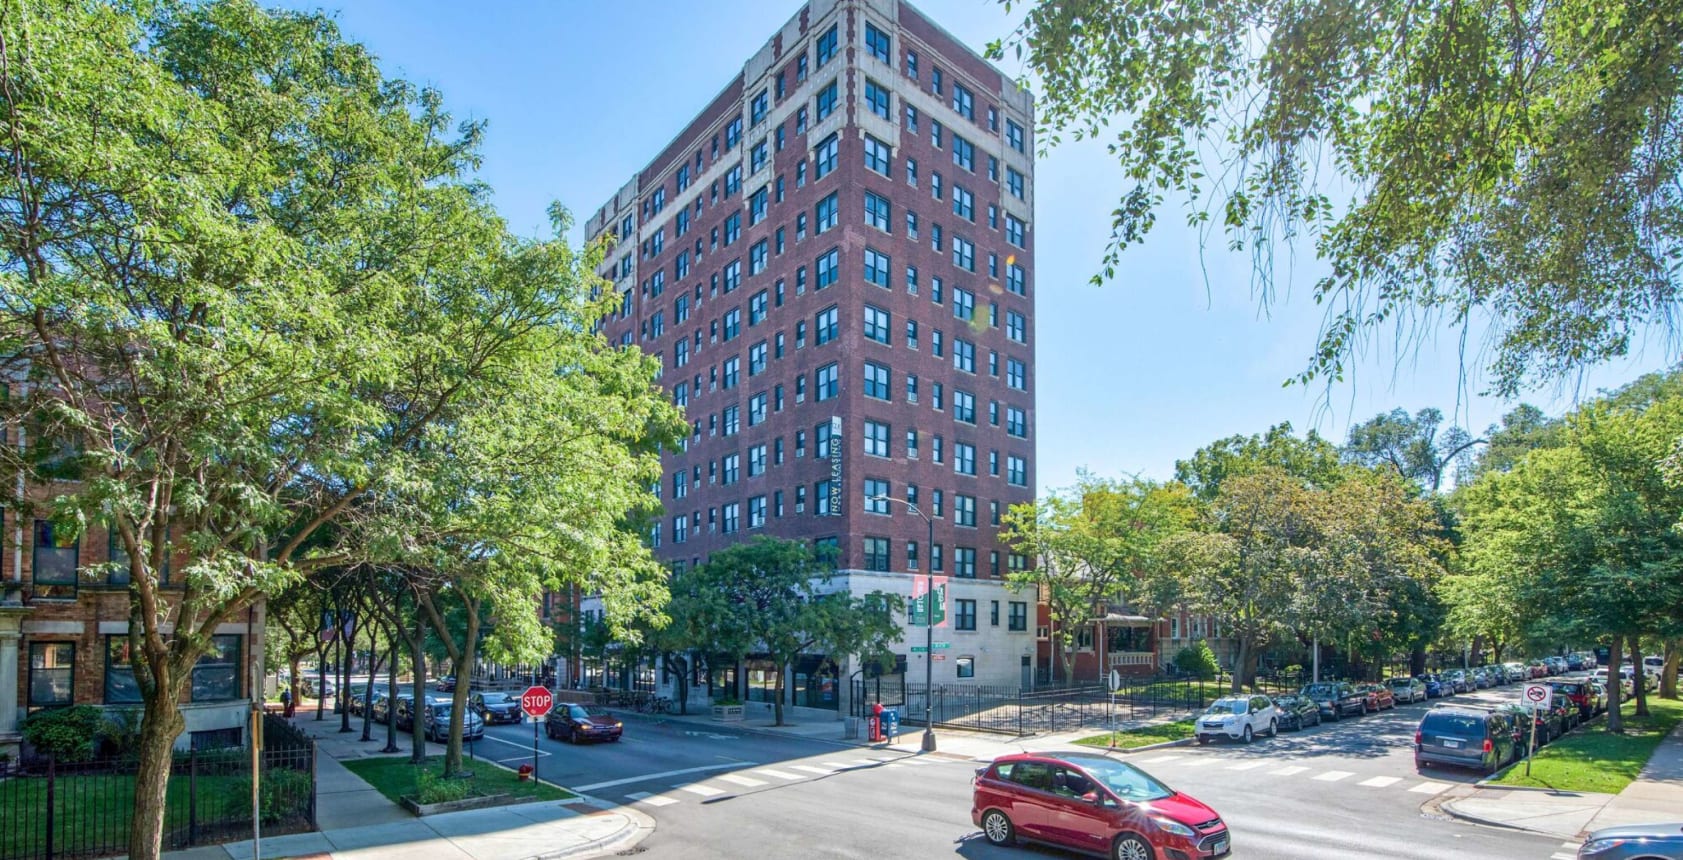 Apartments at The Maynard at 1325 W Wilson in Chicago, Illinois